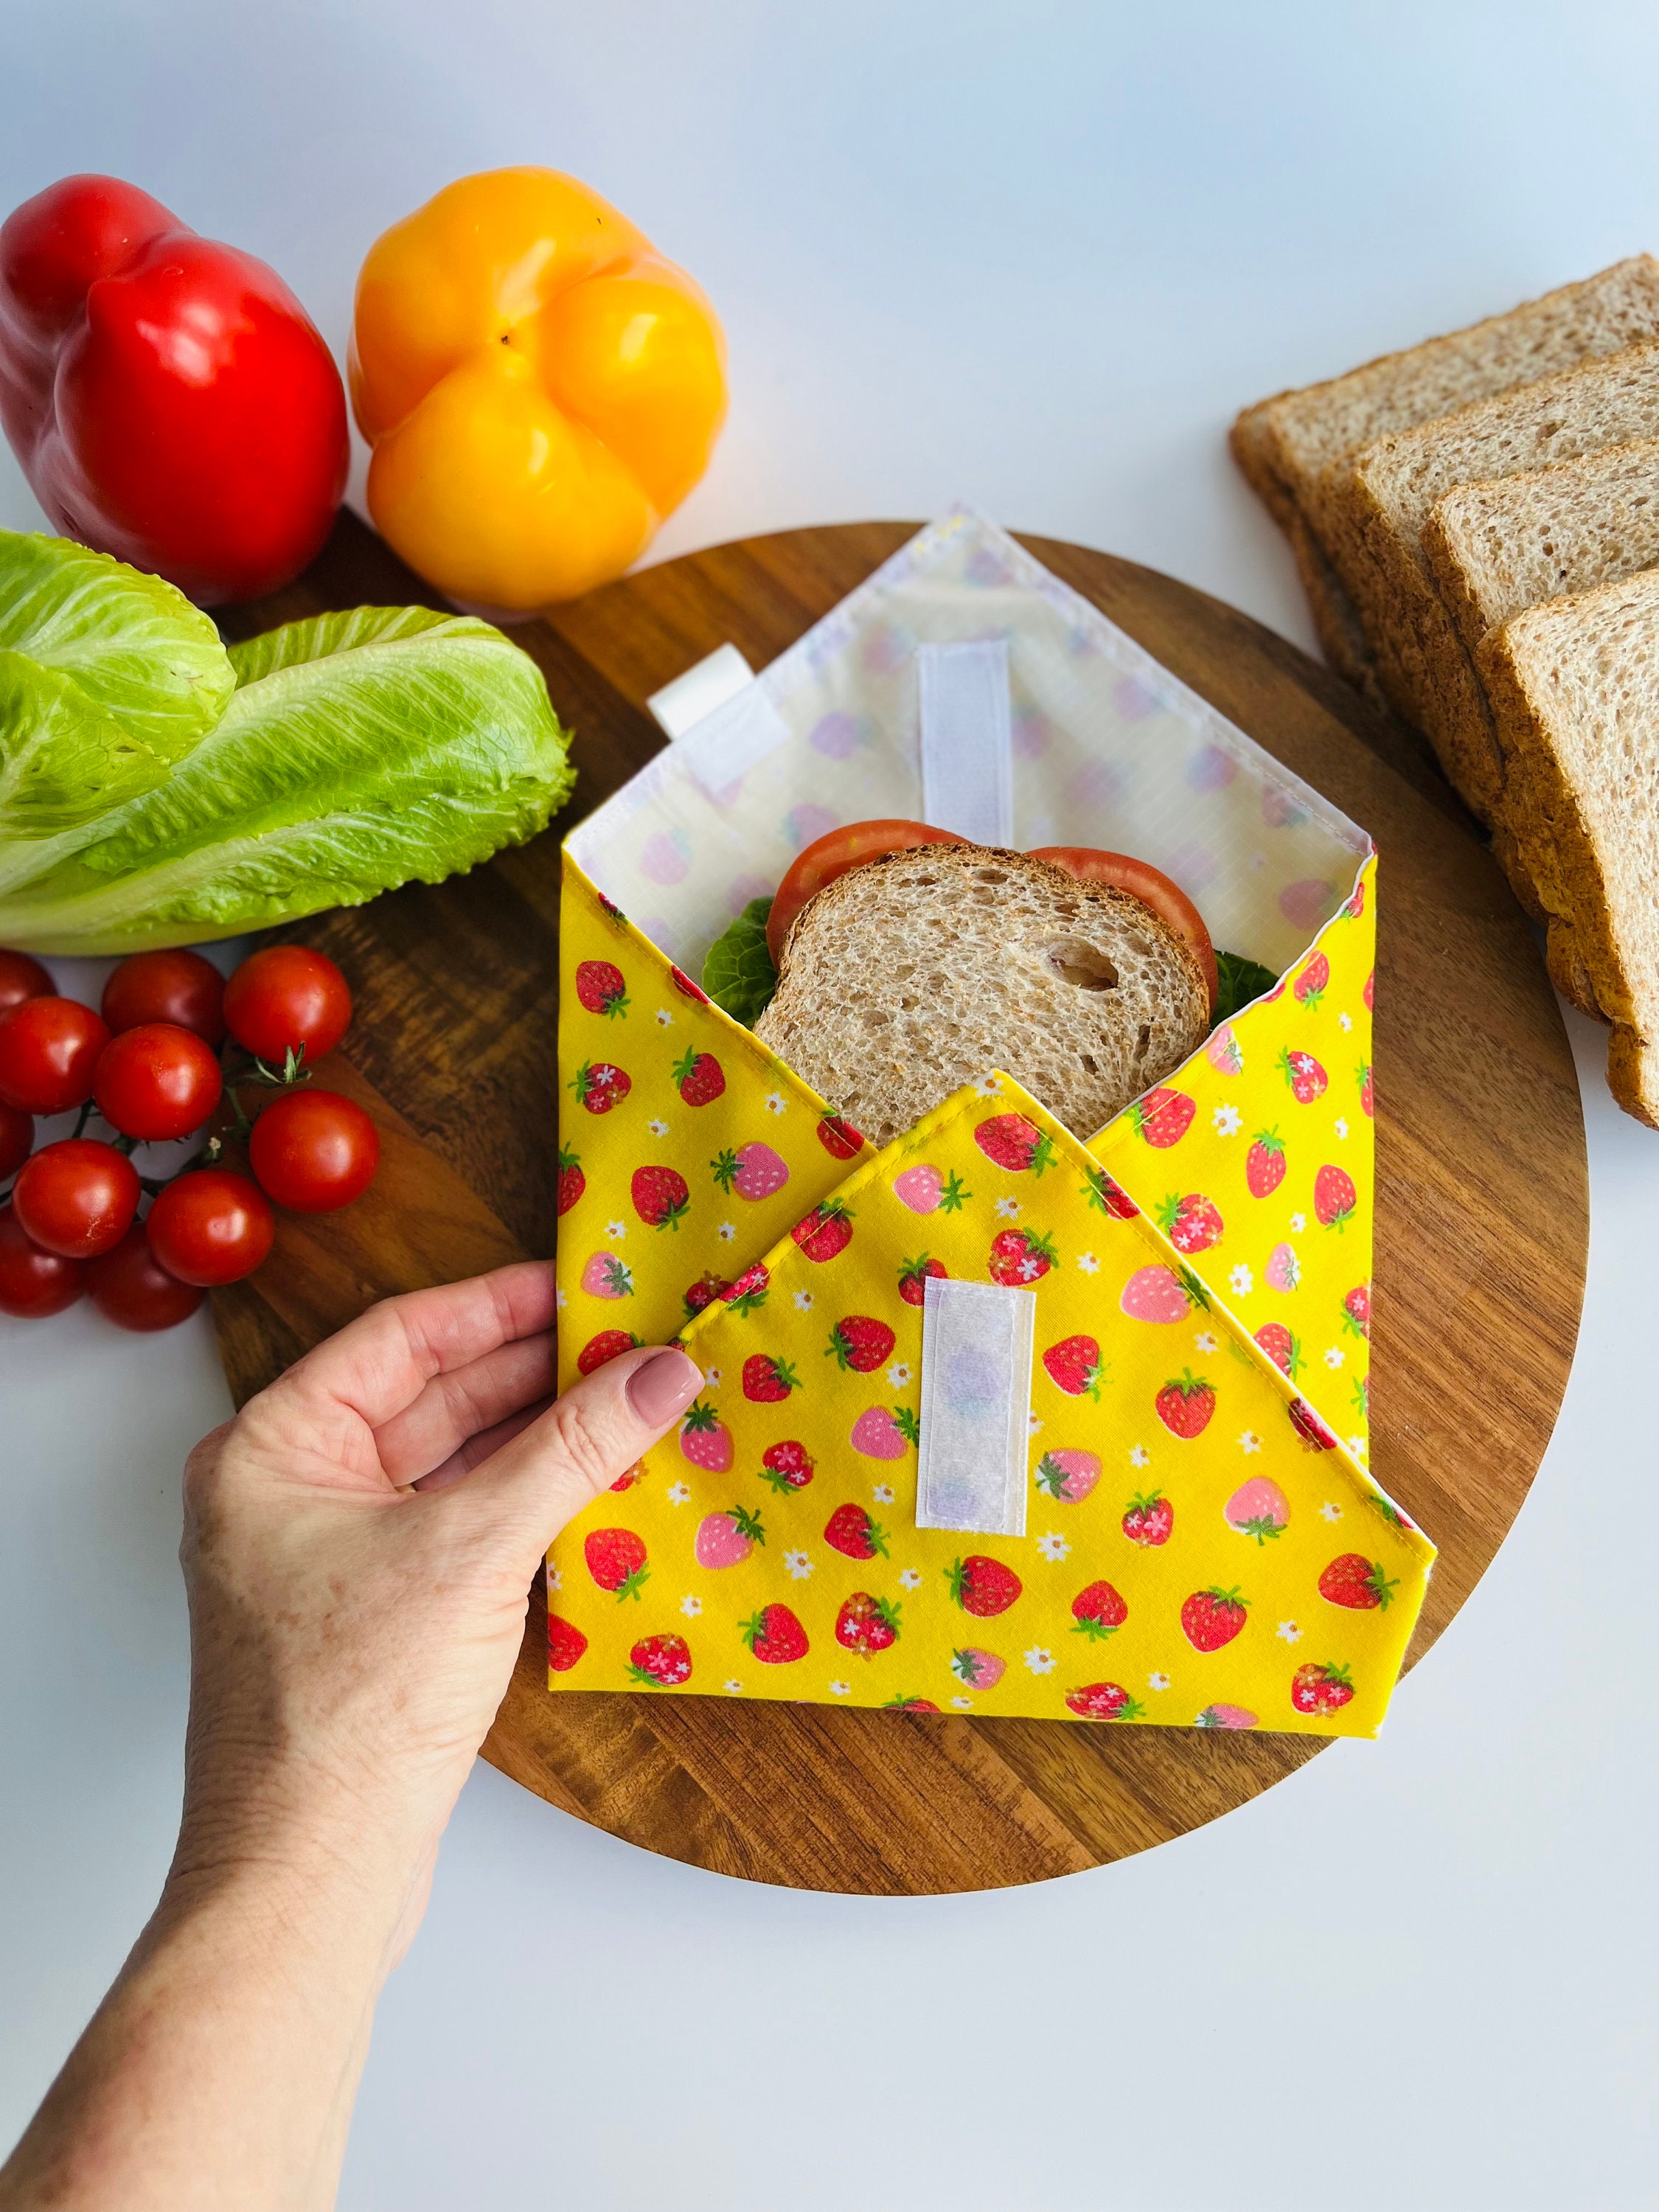 Reusable Beeswax Food Wraps - Small Lunch Pack -2pc at Rs 380.00, Food  Grade Paper